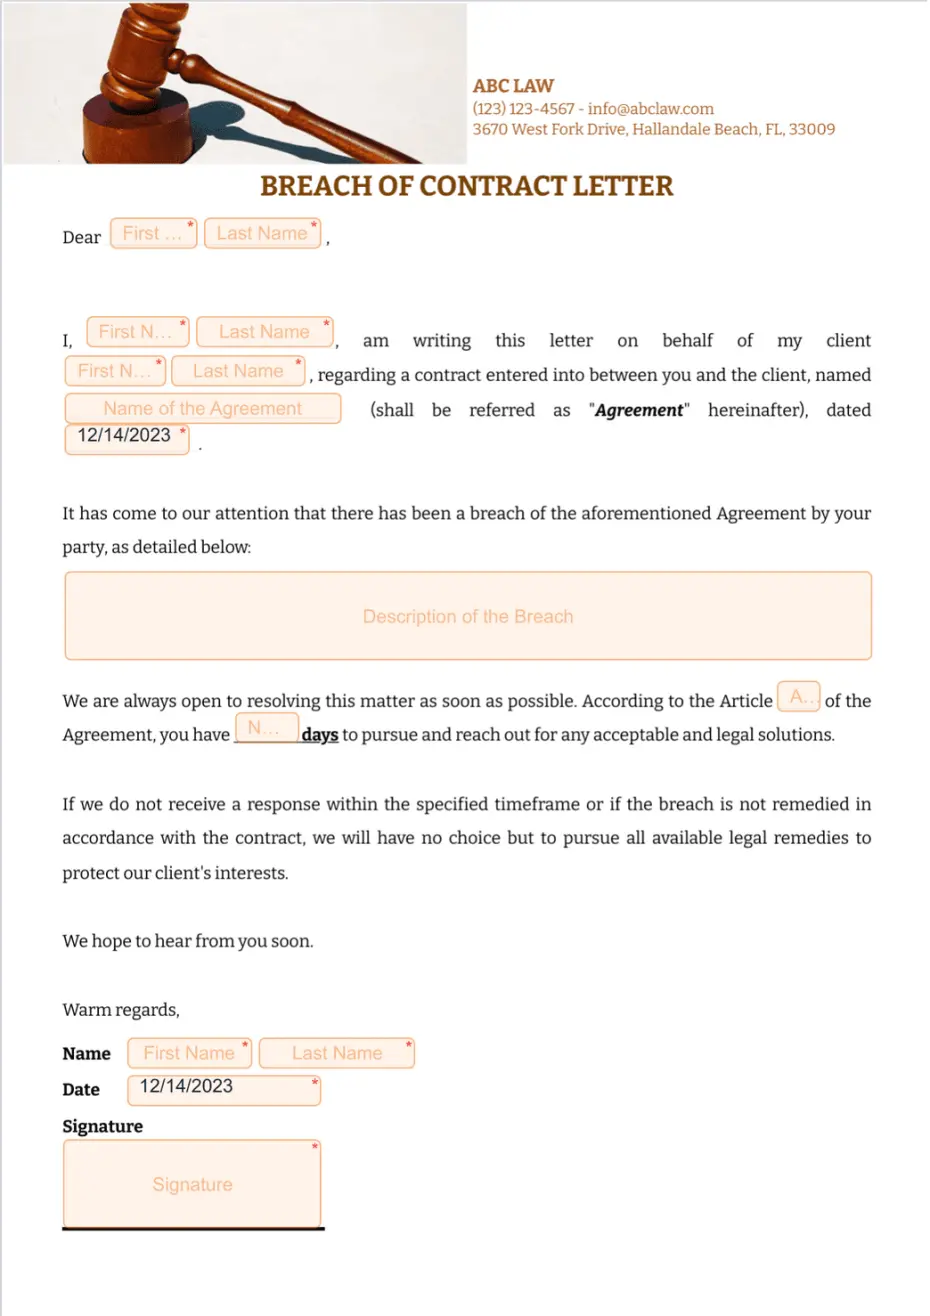 Breach of Contract Letter 